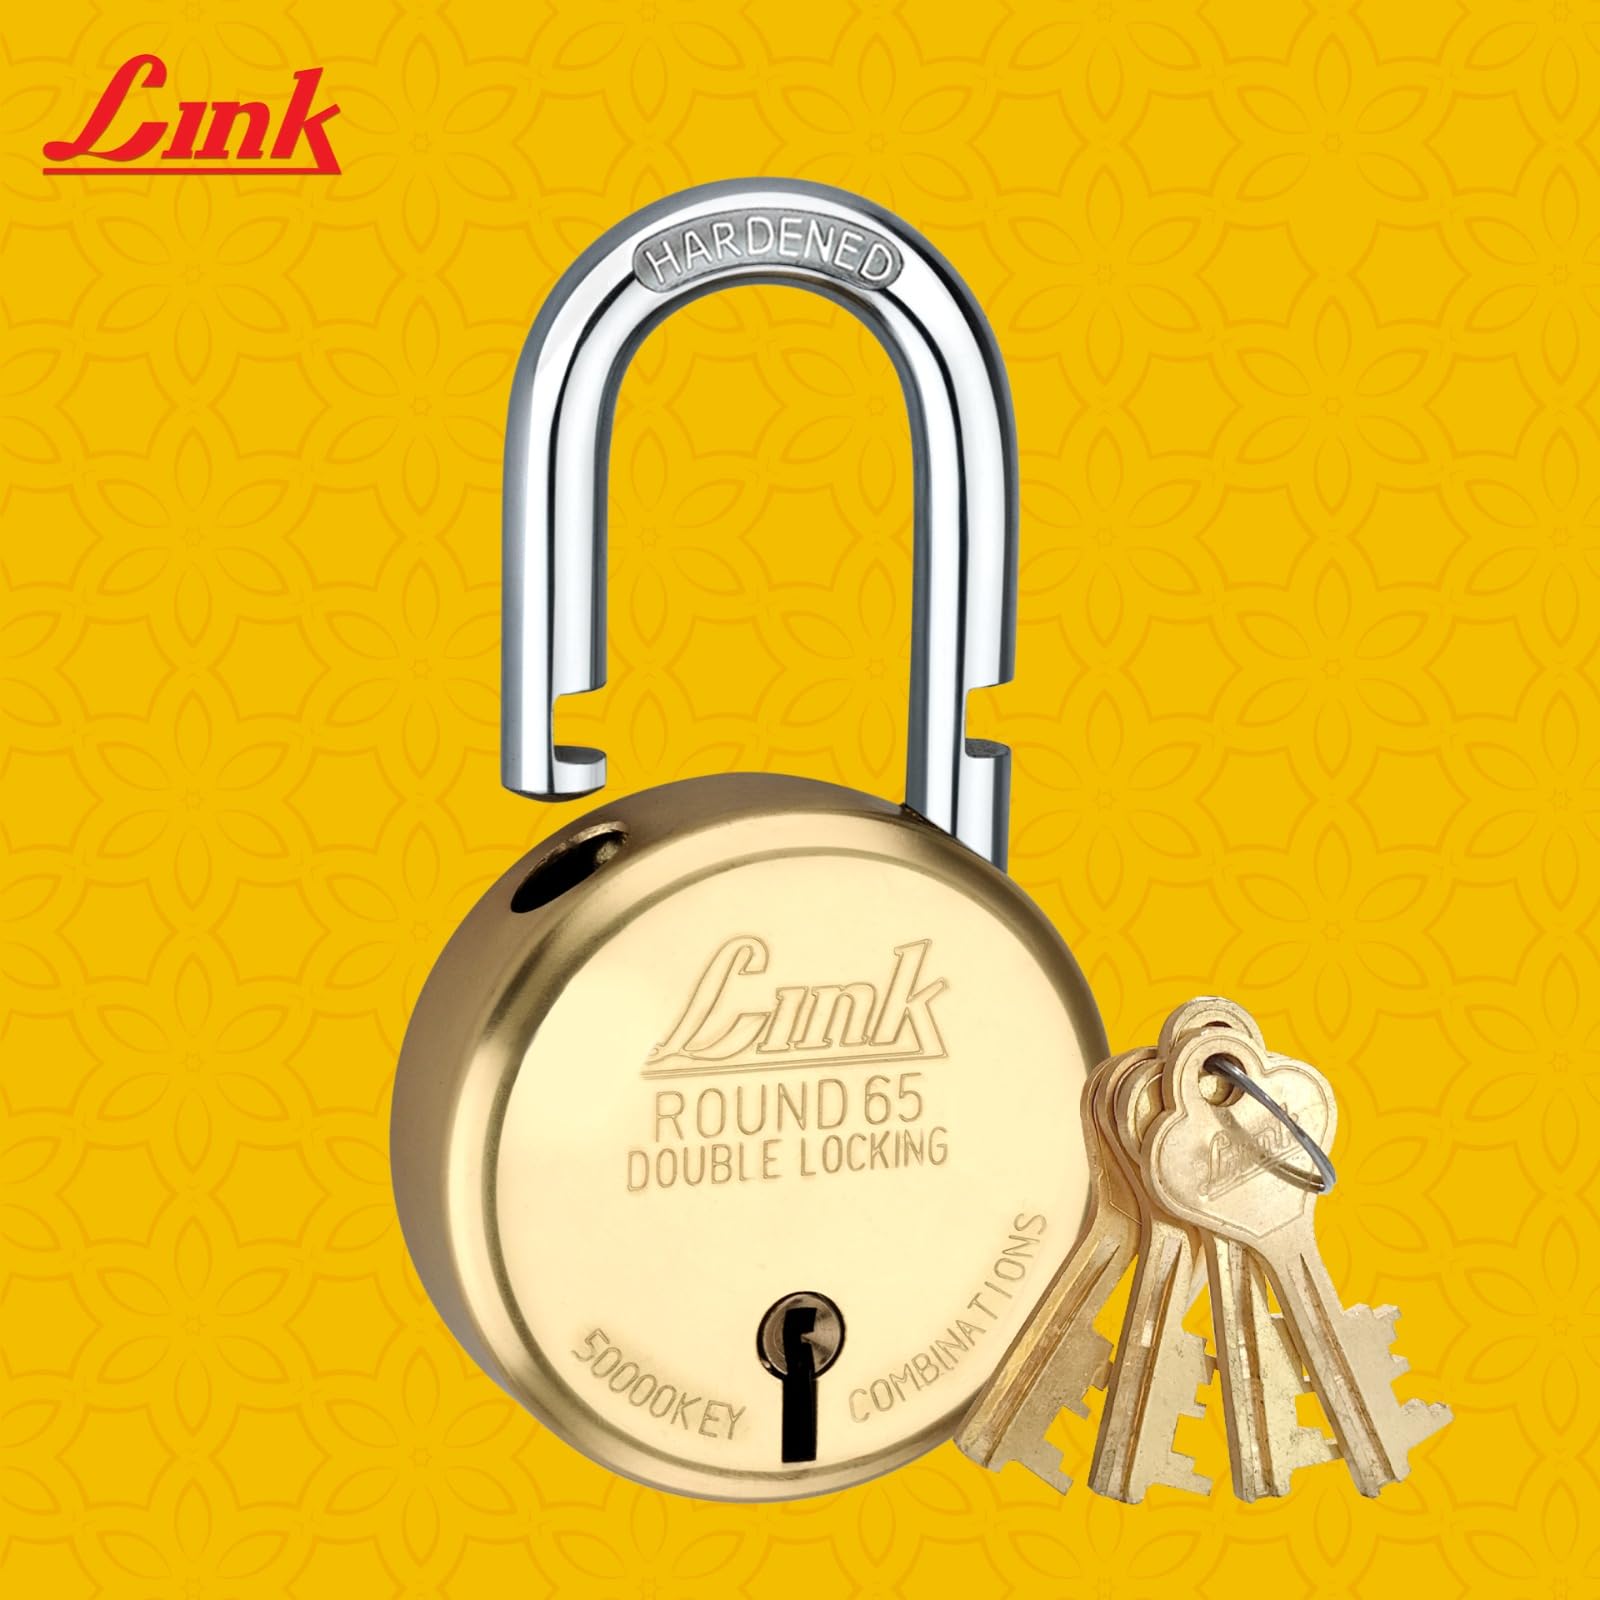 Link Exclusive Silver with Gold Festival Offer Buy Round 65 Brass Body (4 Keys) 8 Levers Padlock Get New Round 65 Free | Hardened Shackle | Double Locking | Buy 1 Get 1 Free | 15 Years Warranty.